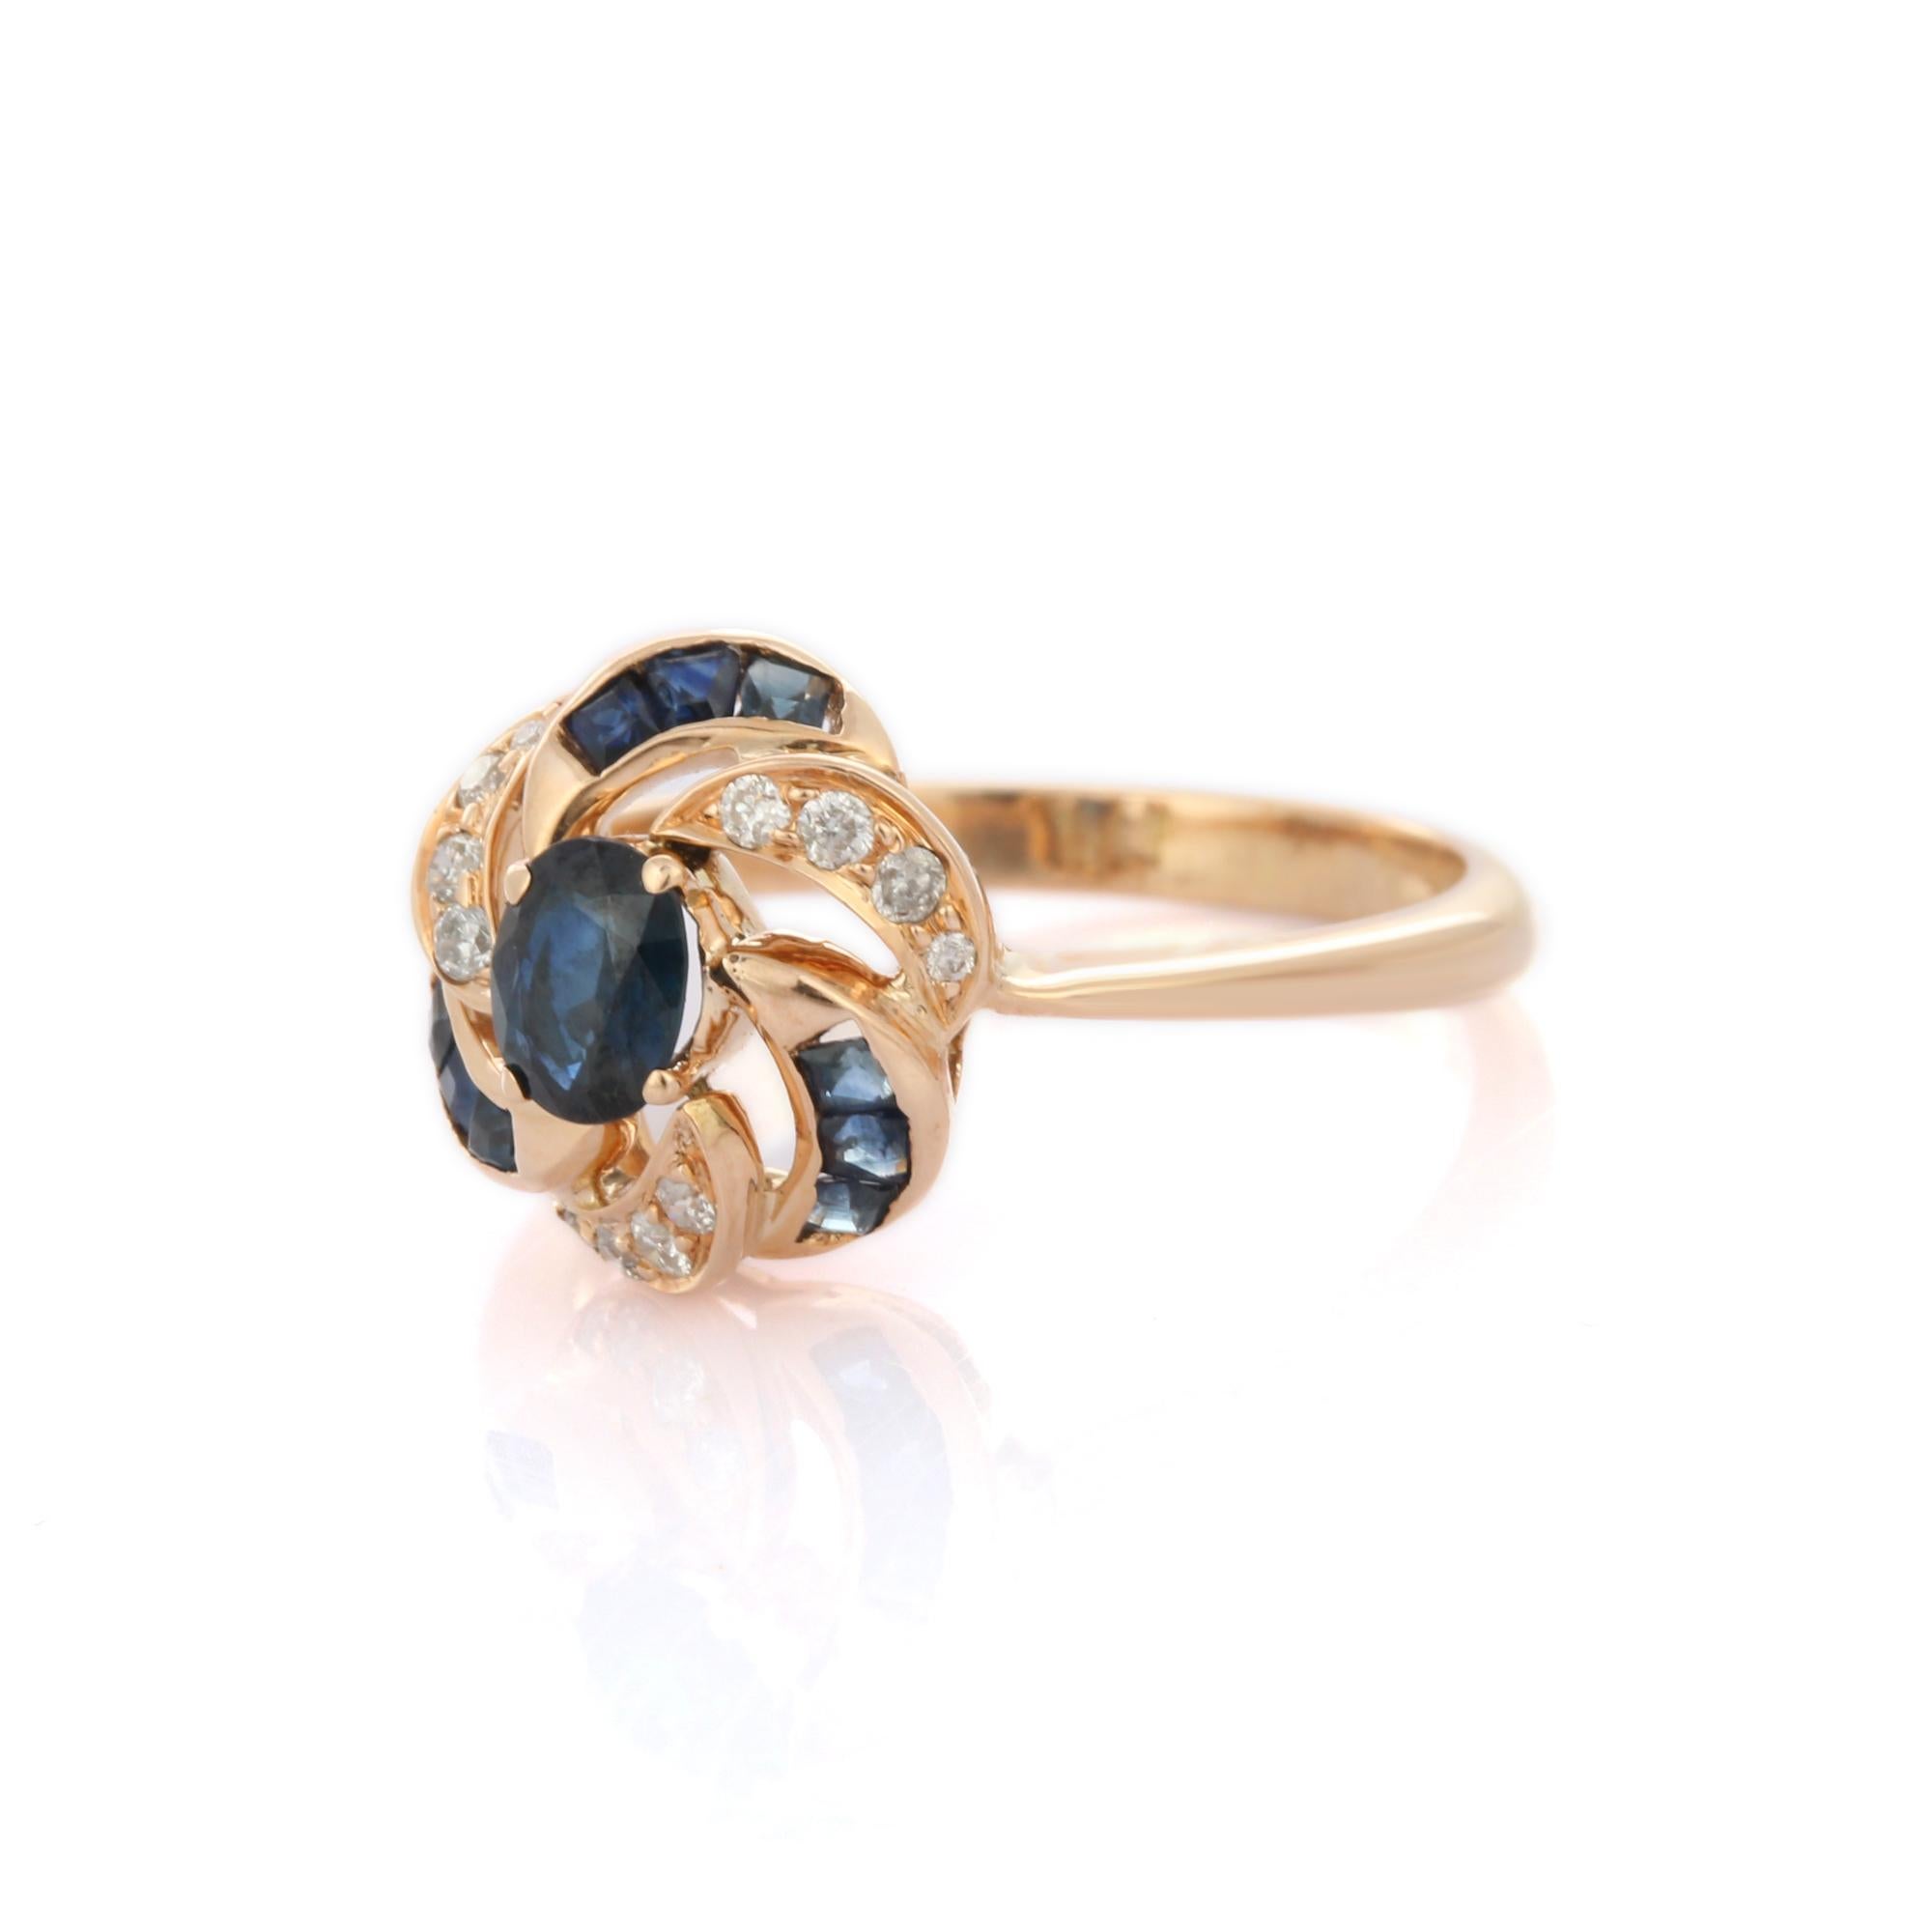 Im Angebot: Enticing Sapphire Diamond Floral Bridal Ring in 14K Solid Gelbgold () 3